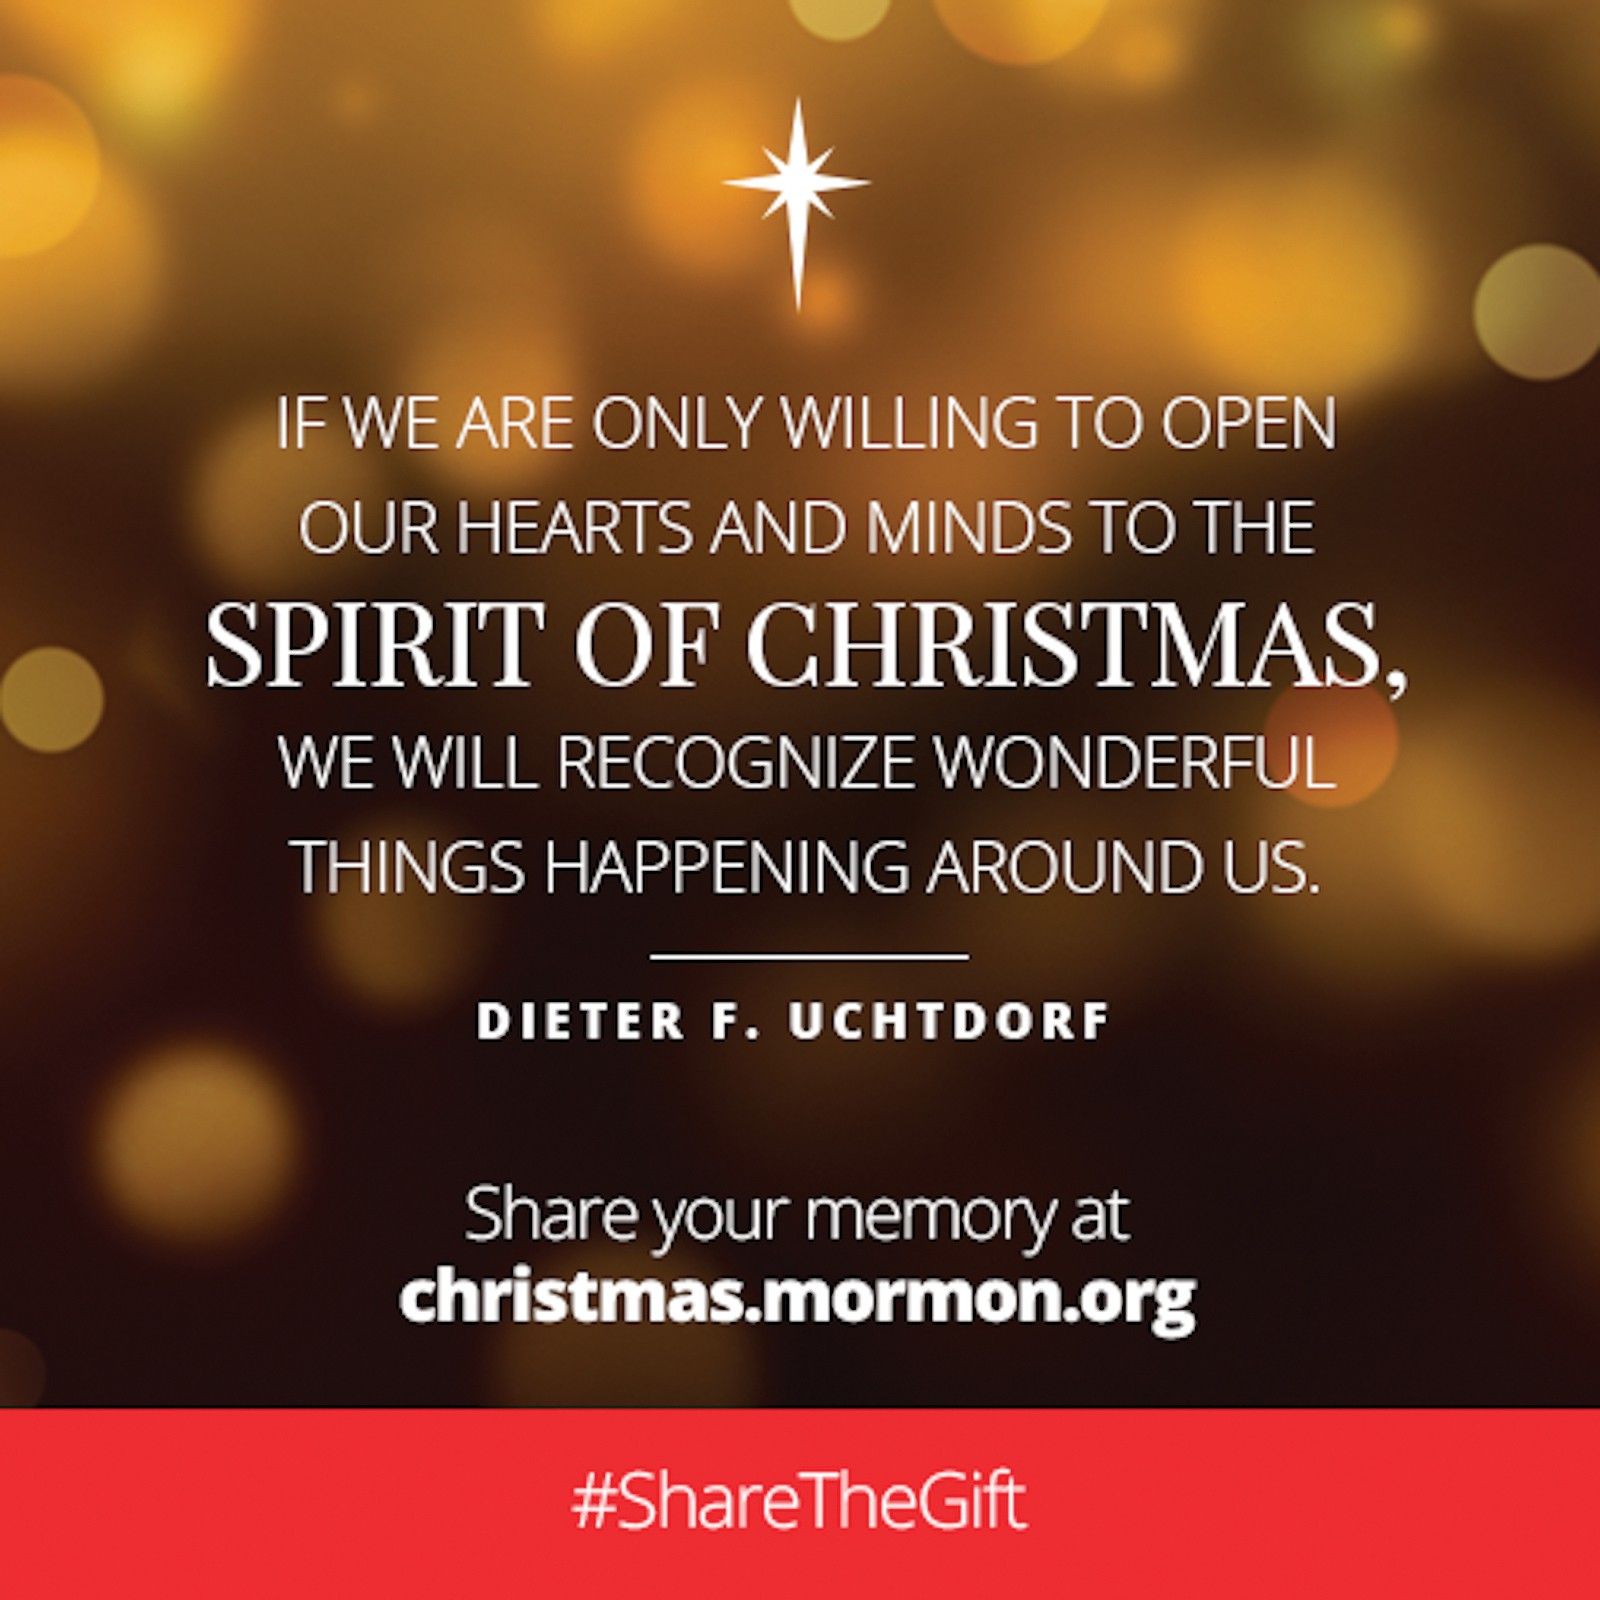 “If we are only willing to open our hearts and minds to the spirit of Christmas, we will recognize wonderful things happening around us.”—President Dieter F. Uchtdorf, “Of Curtains, Contentment, and Christmas”